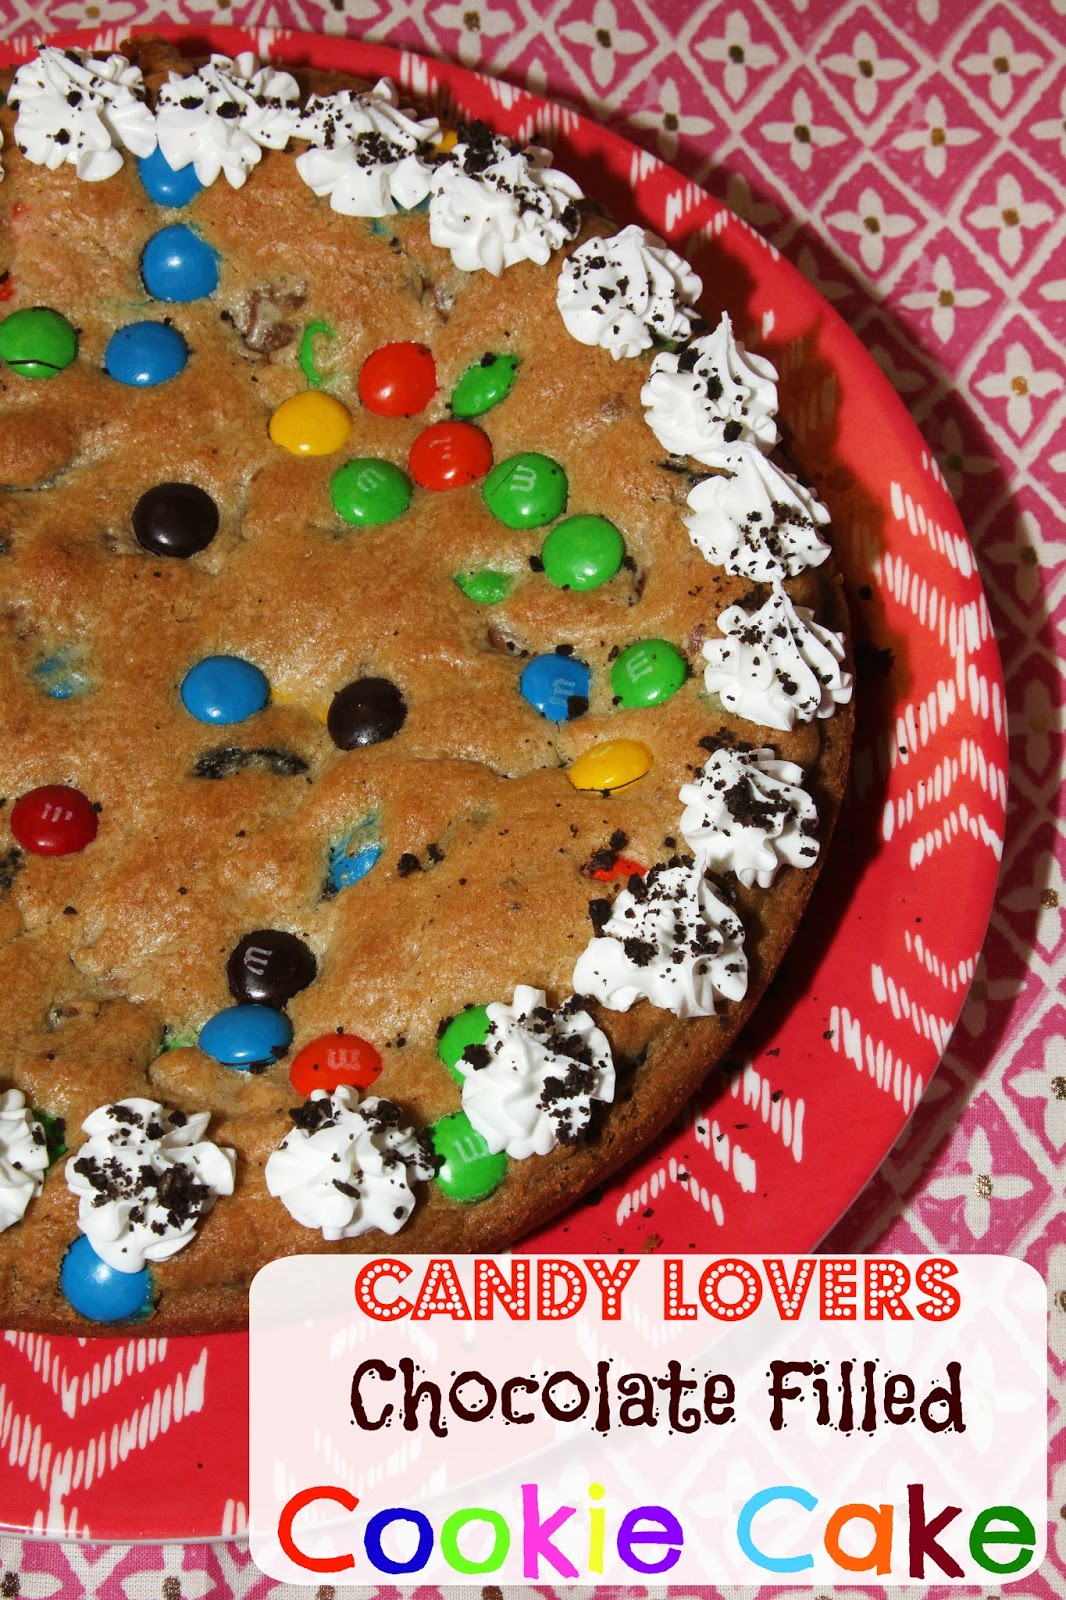 For the Love of Food: Candy Lovers Chocolate Filled Cookie Cake